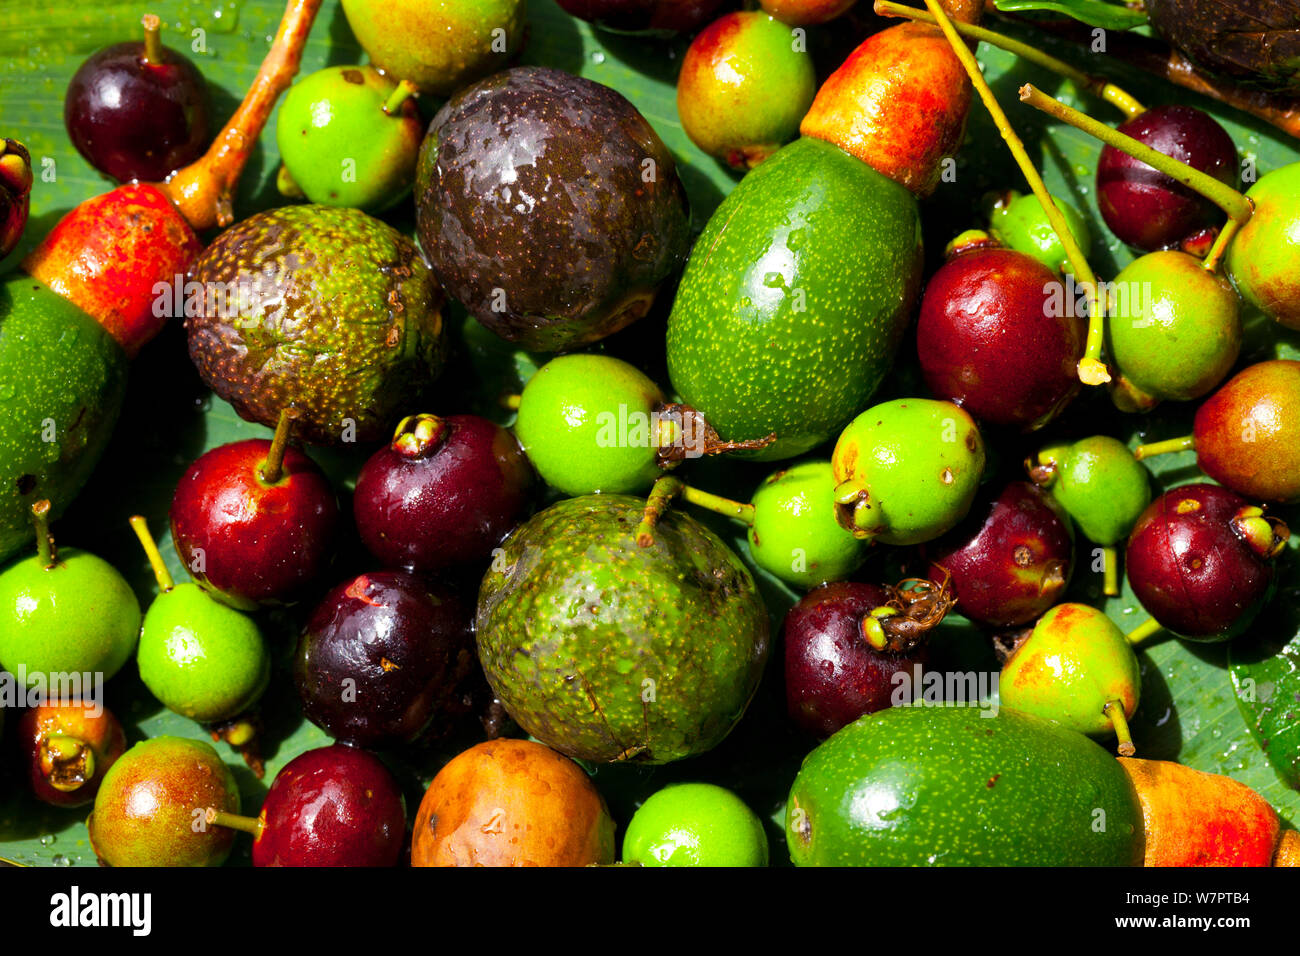 Varitey of fruits including wild avocado from Cloud Forest in Quetzales National Park, Savegre River Valley, Talamanca Range, Costa Rica, Central America Stock Photo